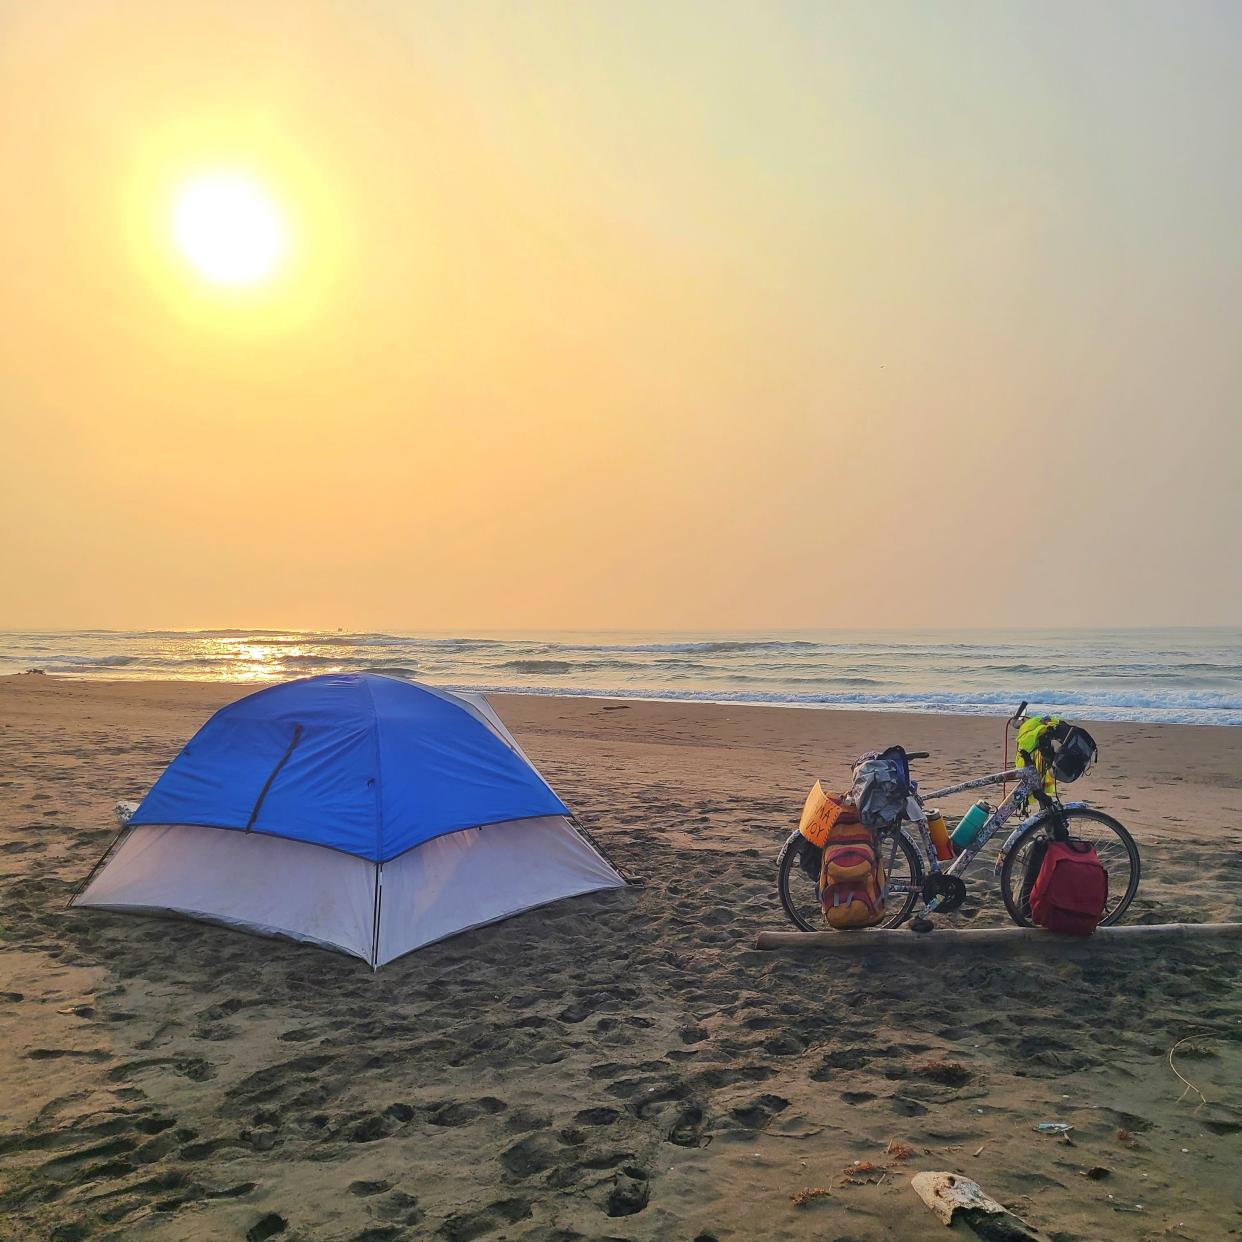 Daniel James of Canton recently completed a bicycling trip through Central America. His home on the road was a tent.